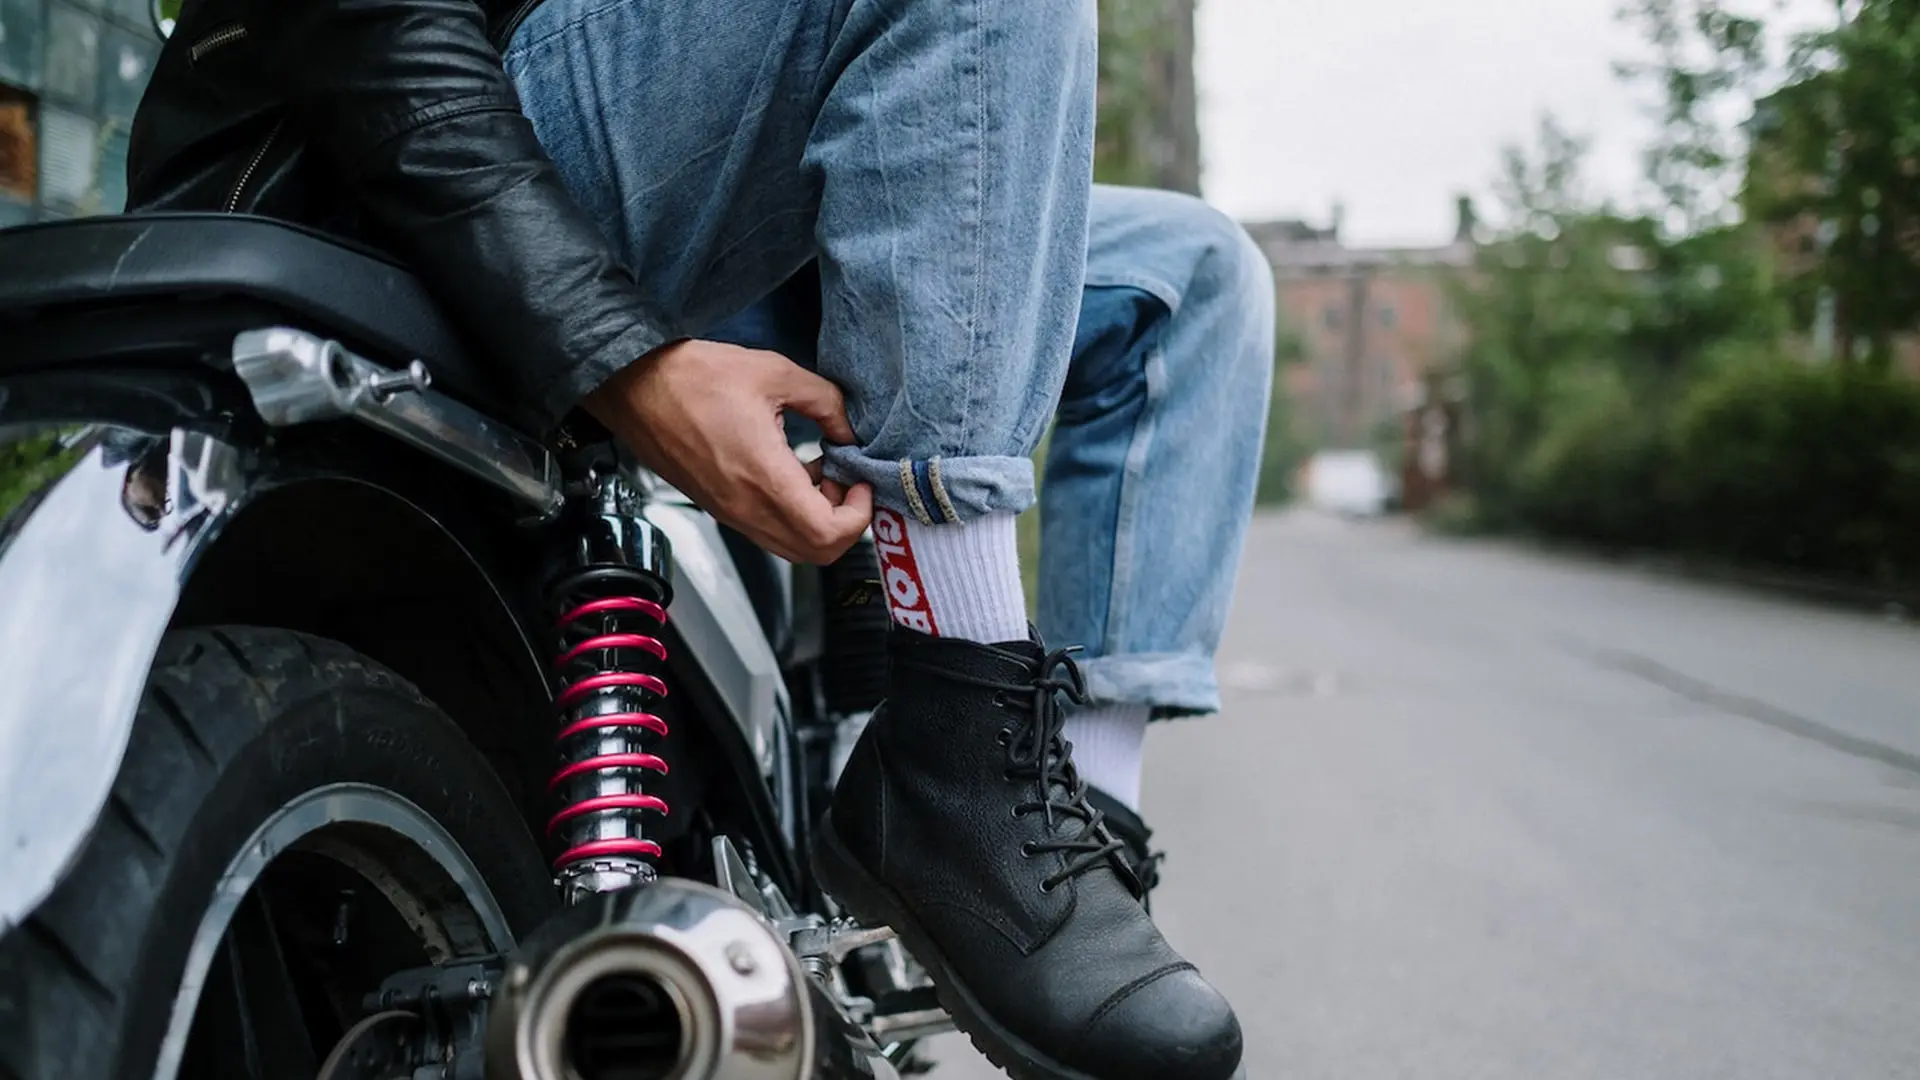 motorcycle rider pulling up socks while sitting on motorcycle parked